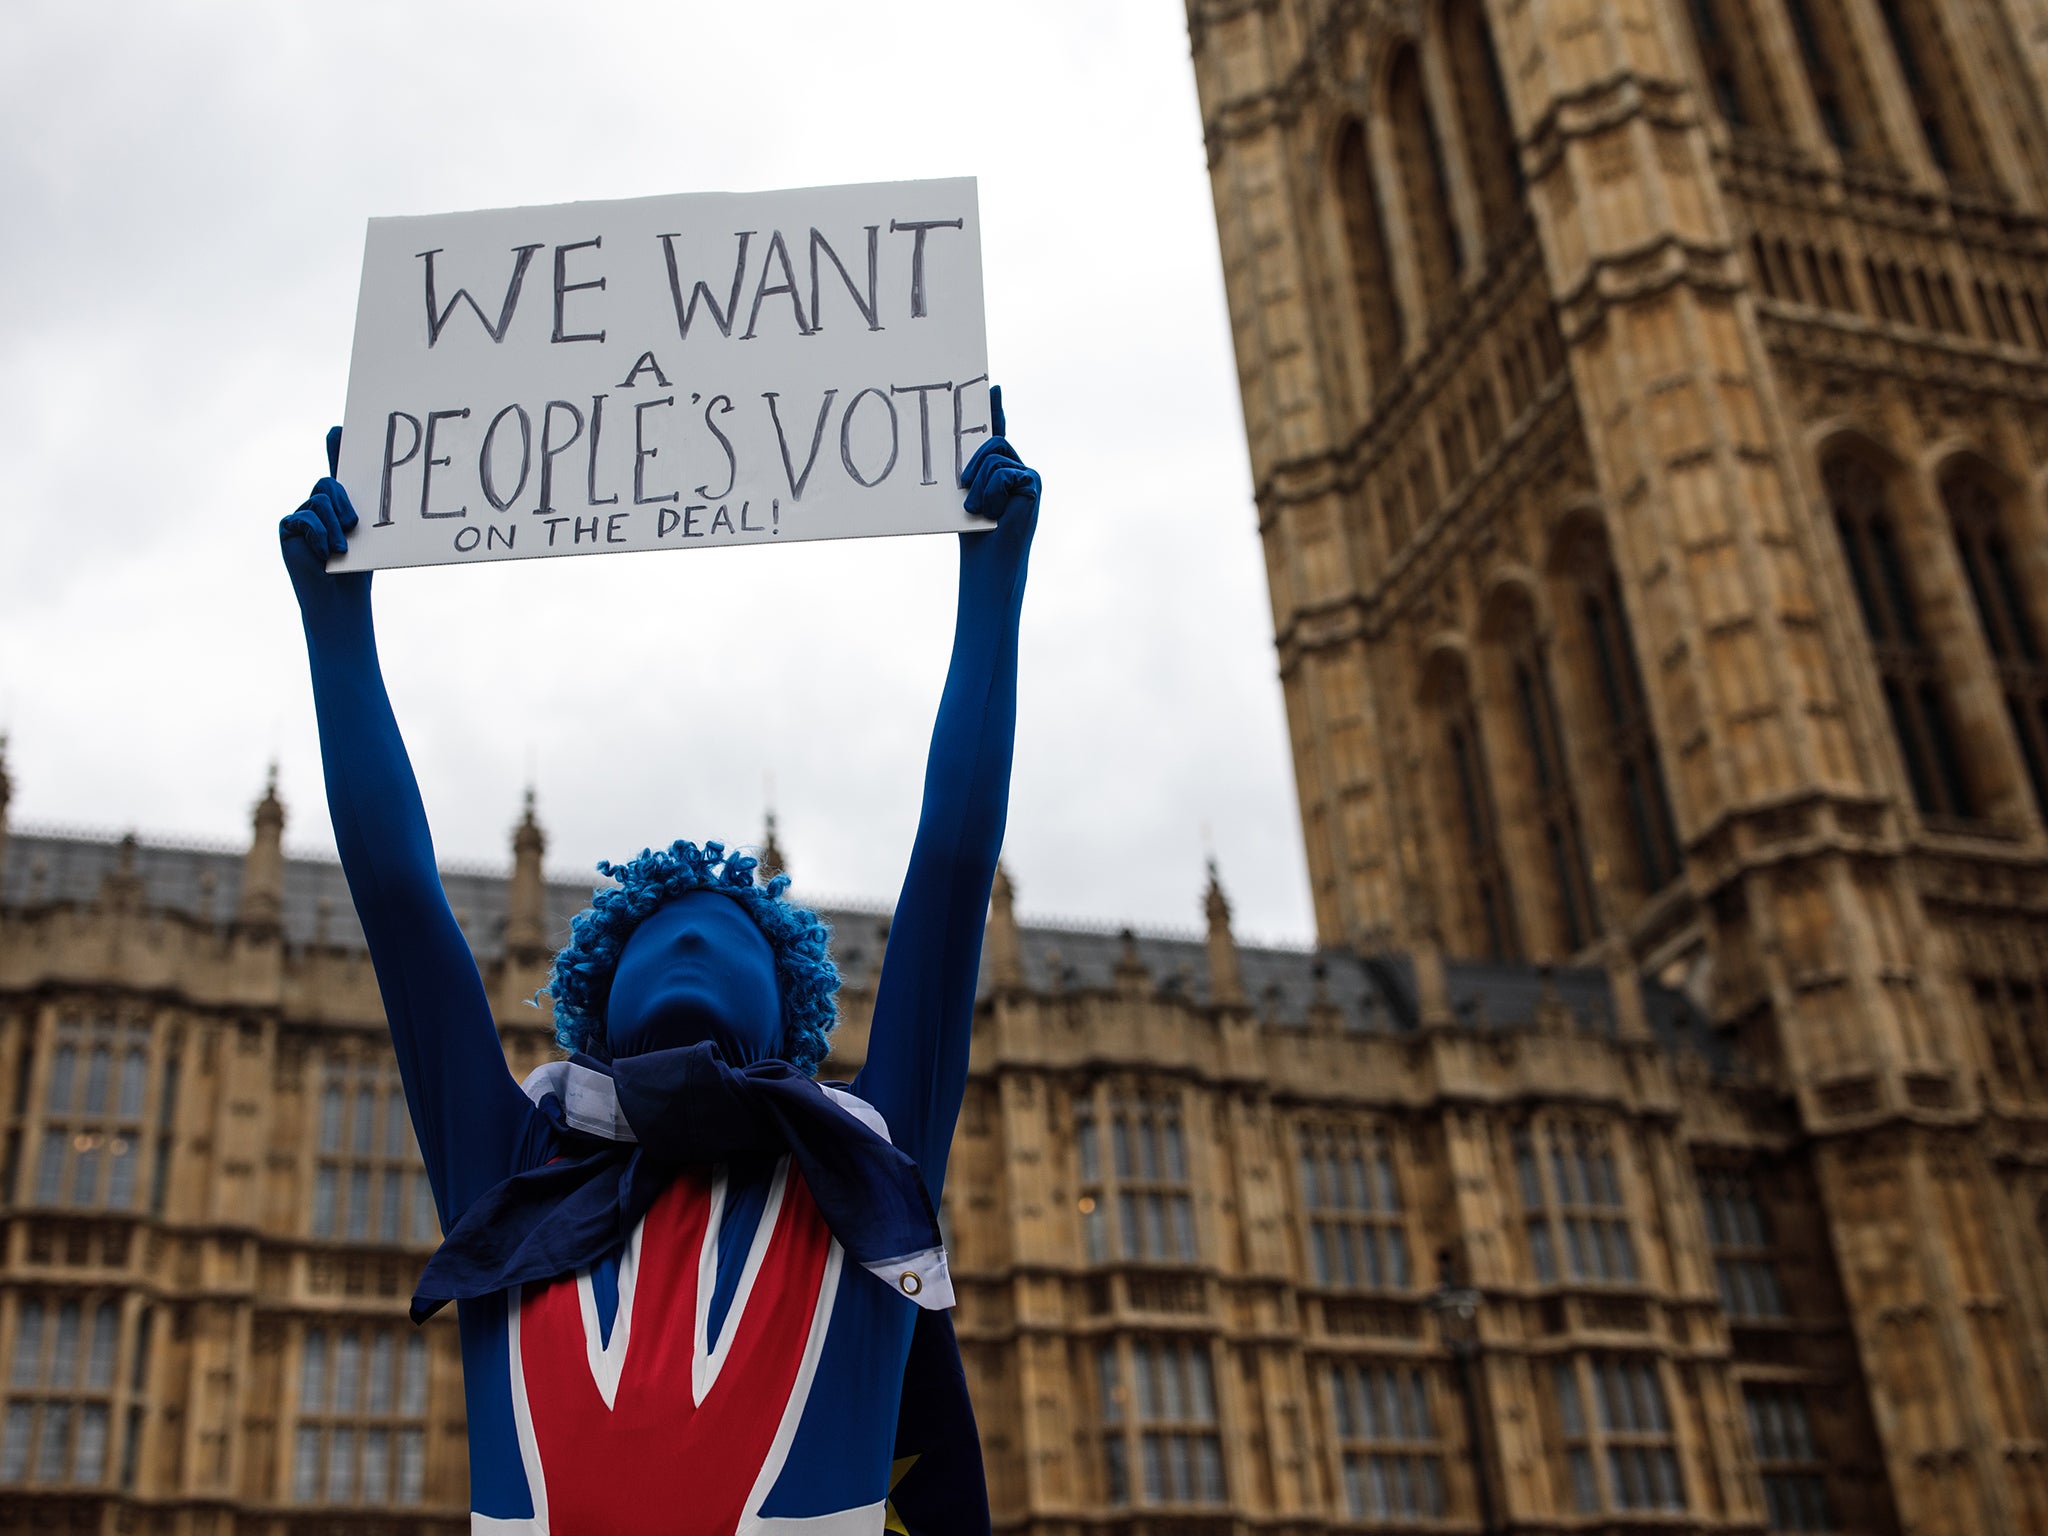 An anti-brexit campaigner holds up a placard during a protest outside the Houses of Parliament